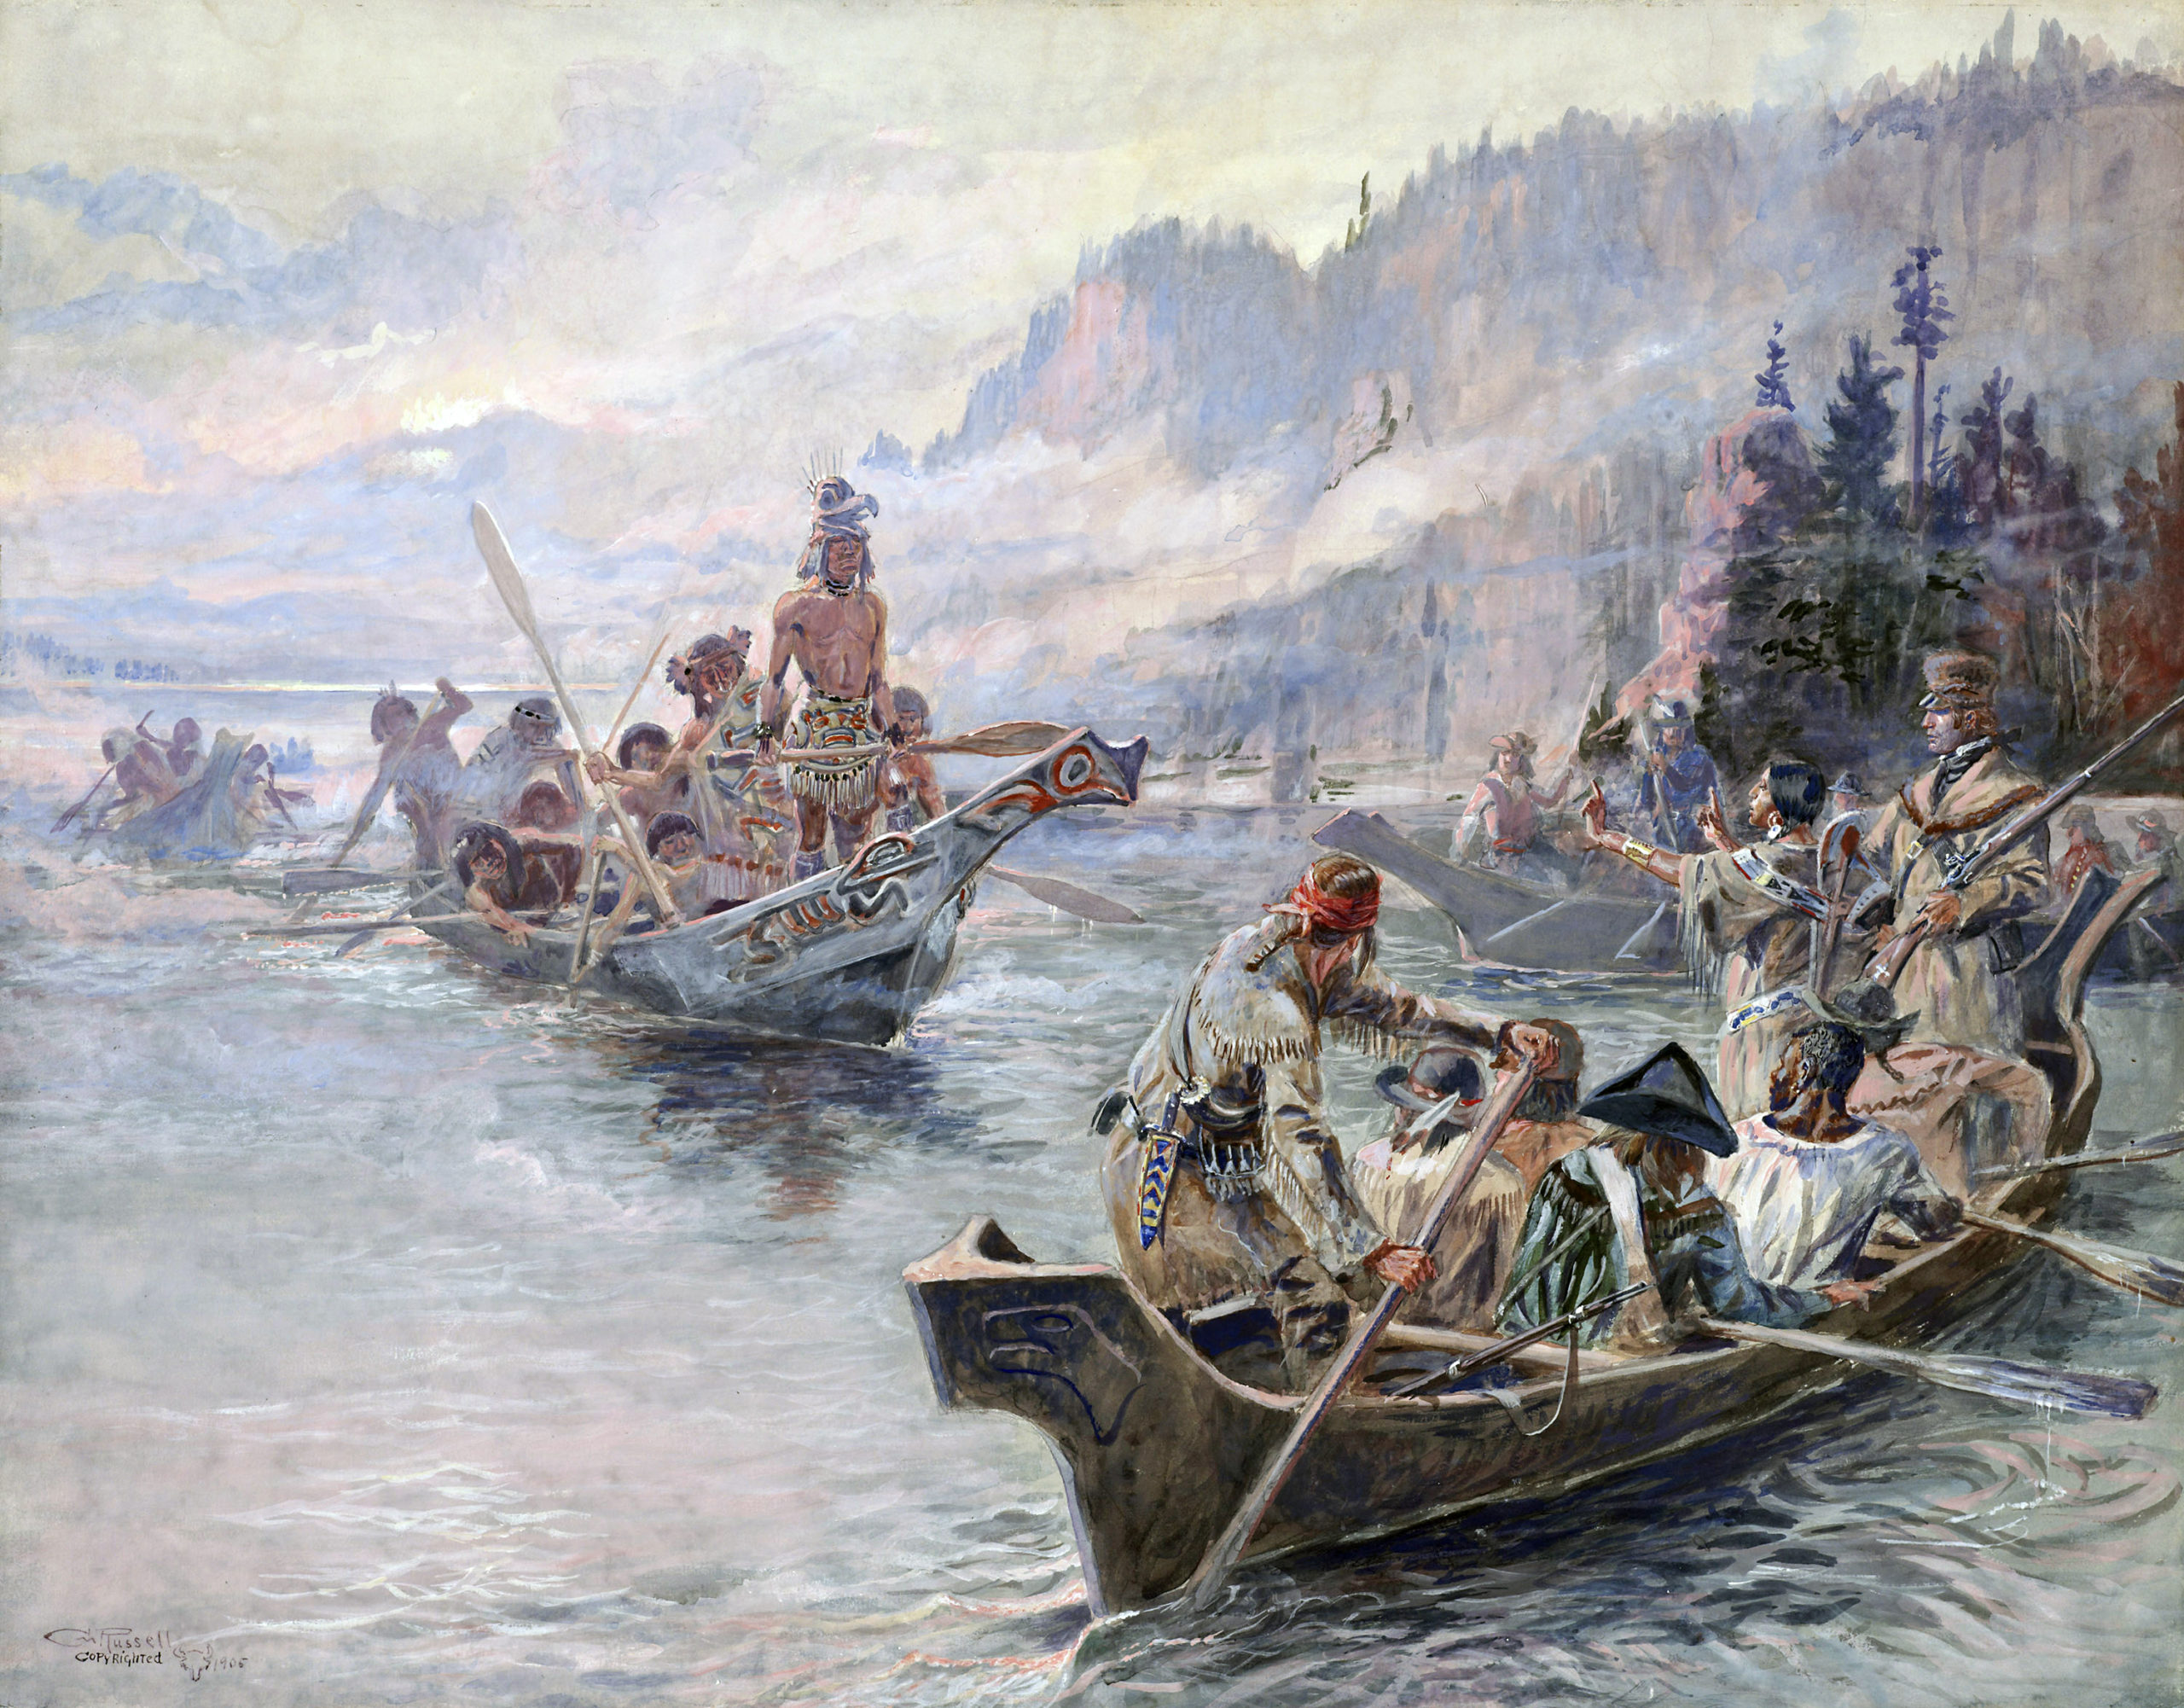 March 16, 1806 - Discover Lewis & Clark